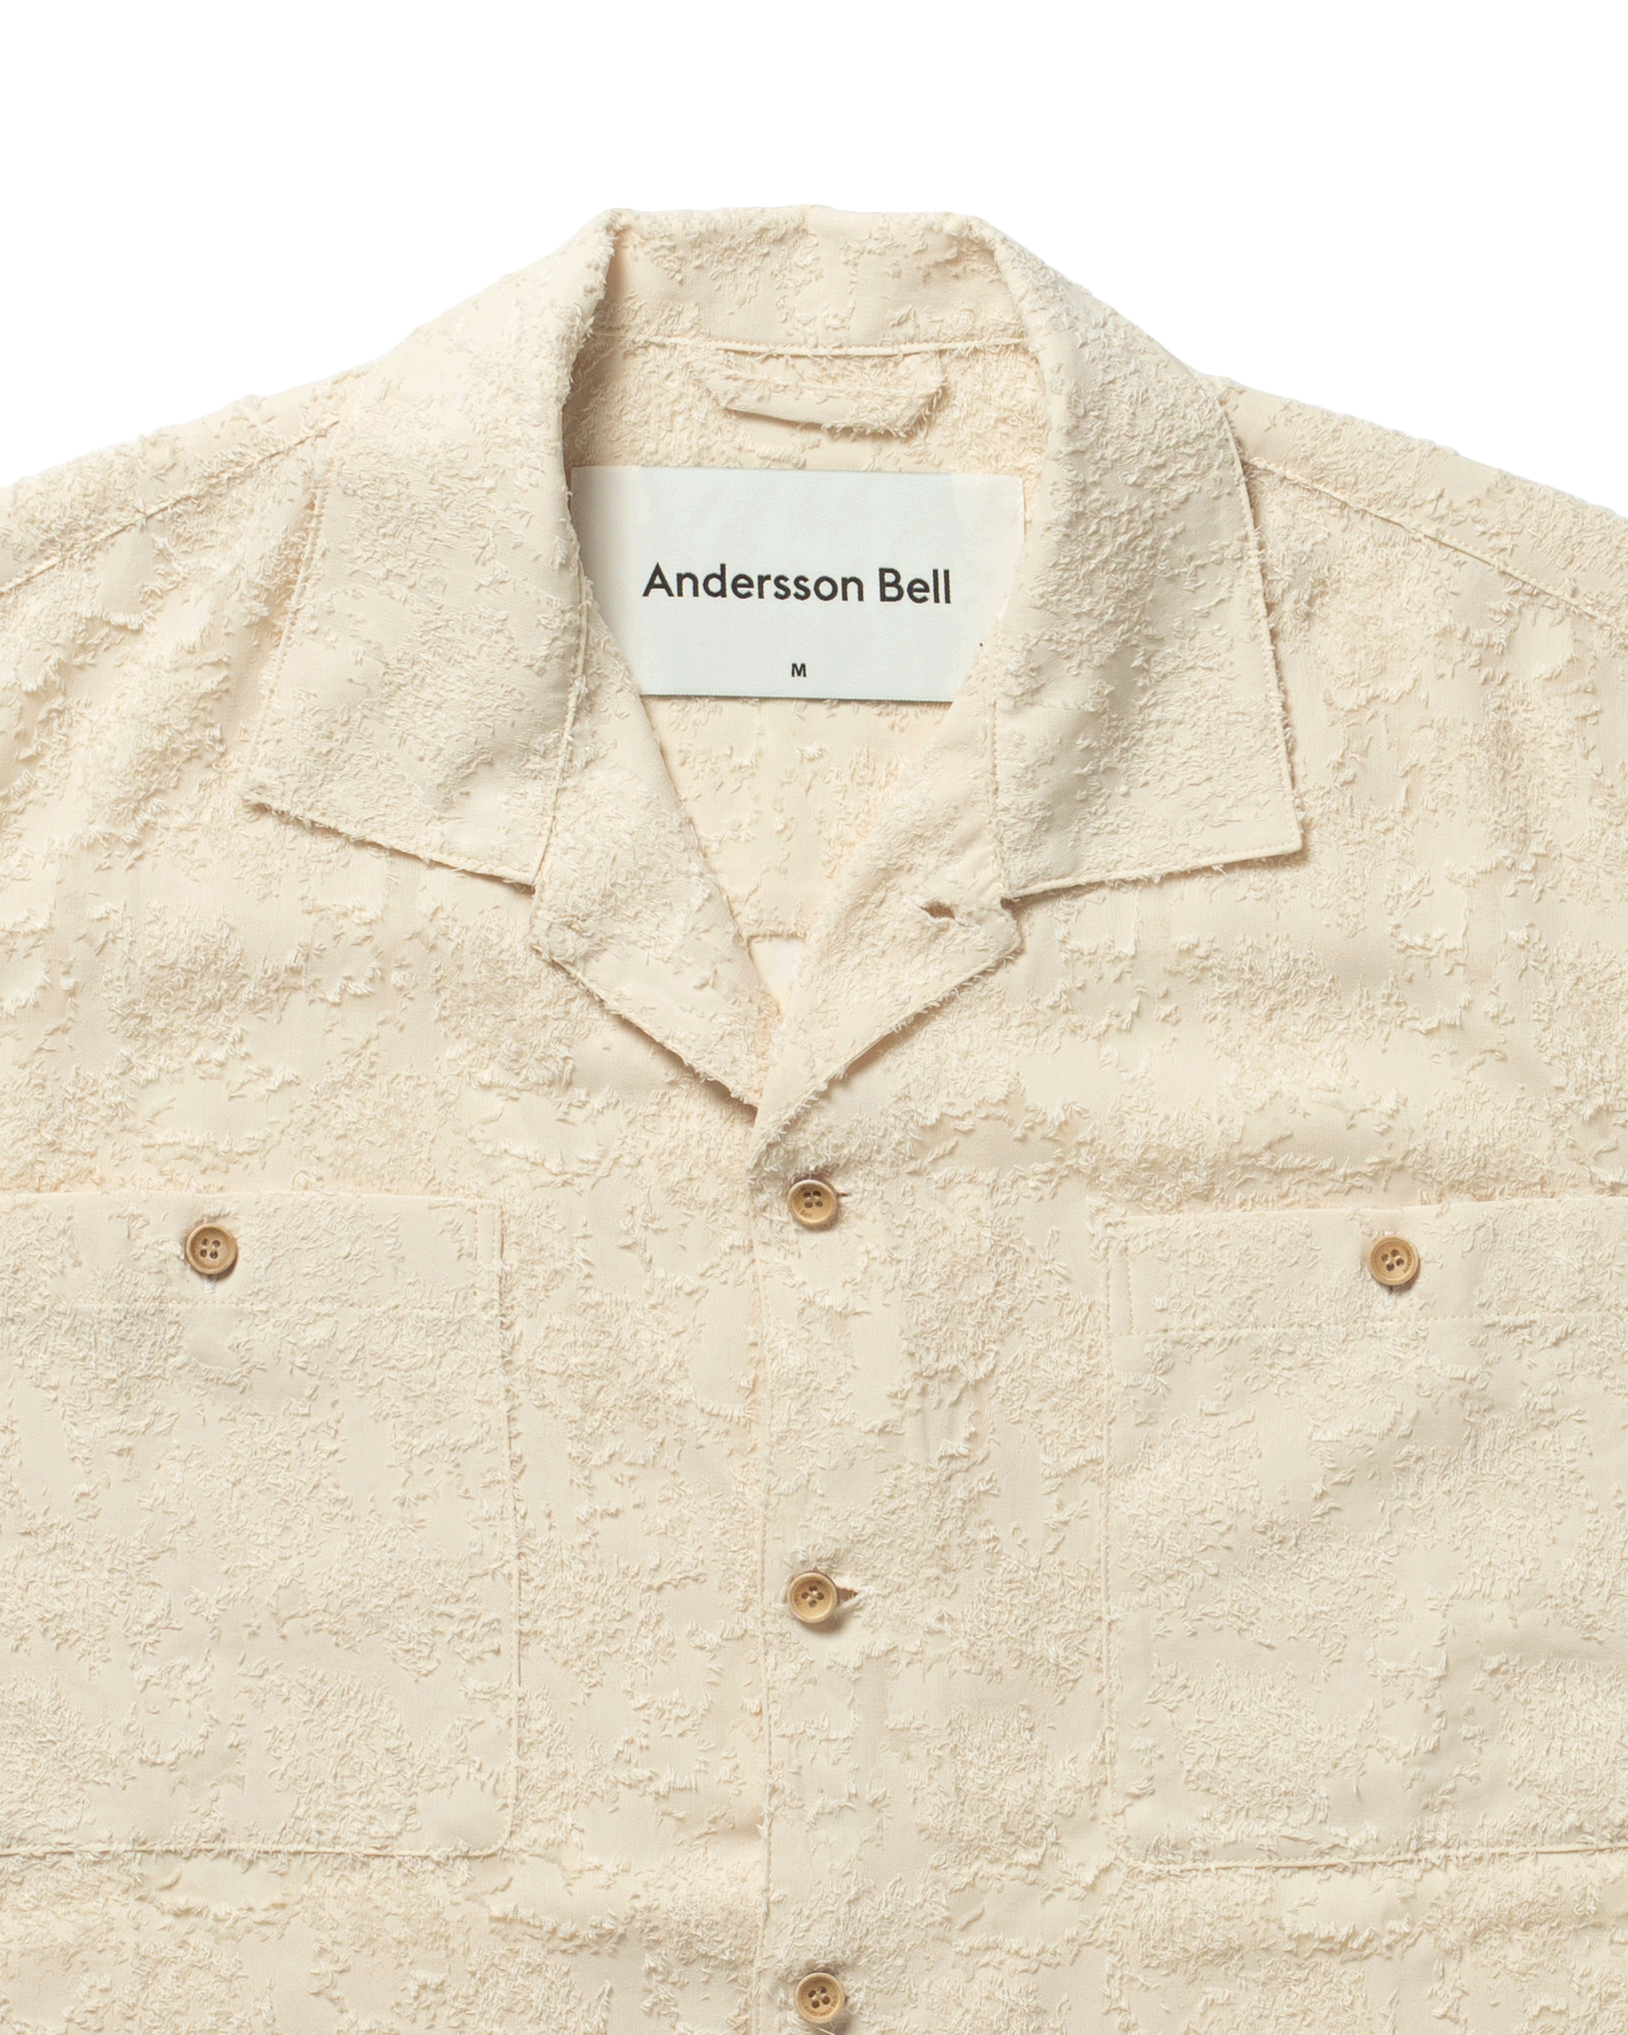 Bali Sheer Open Collar Shirts $319 Andersson Bell Tops Shirts Beige